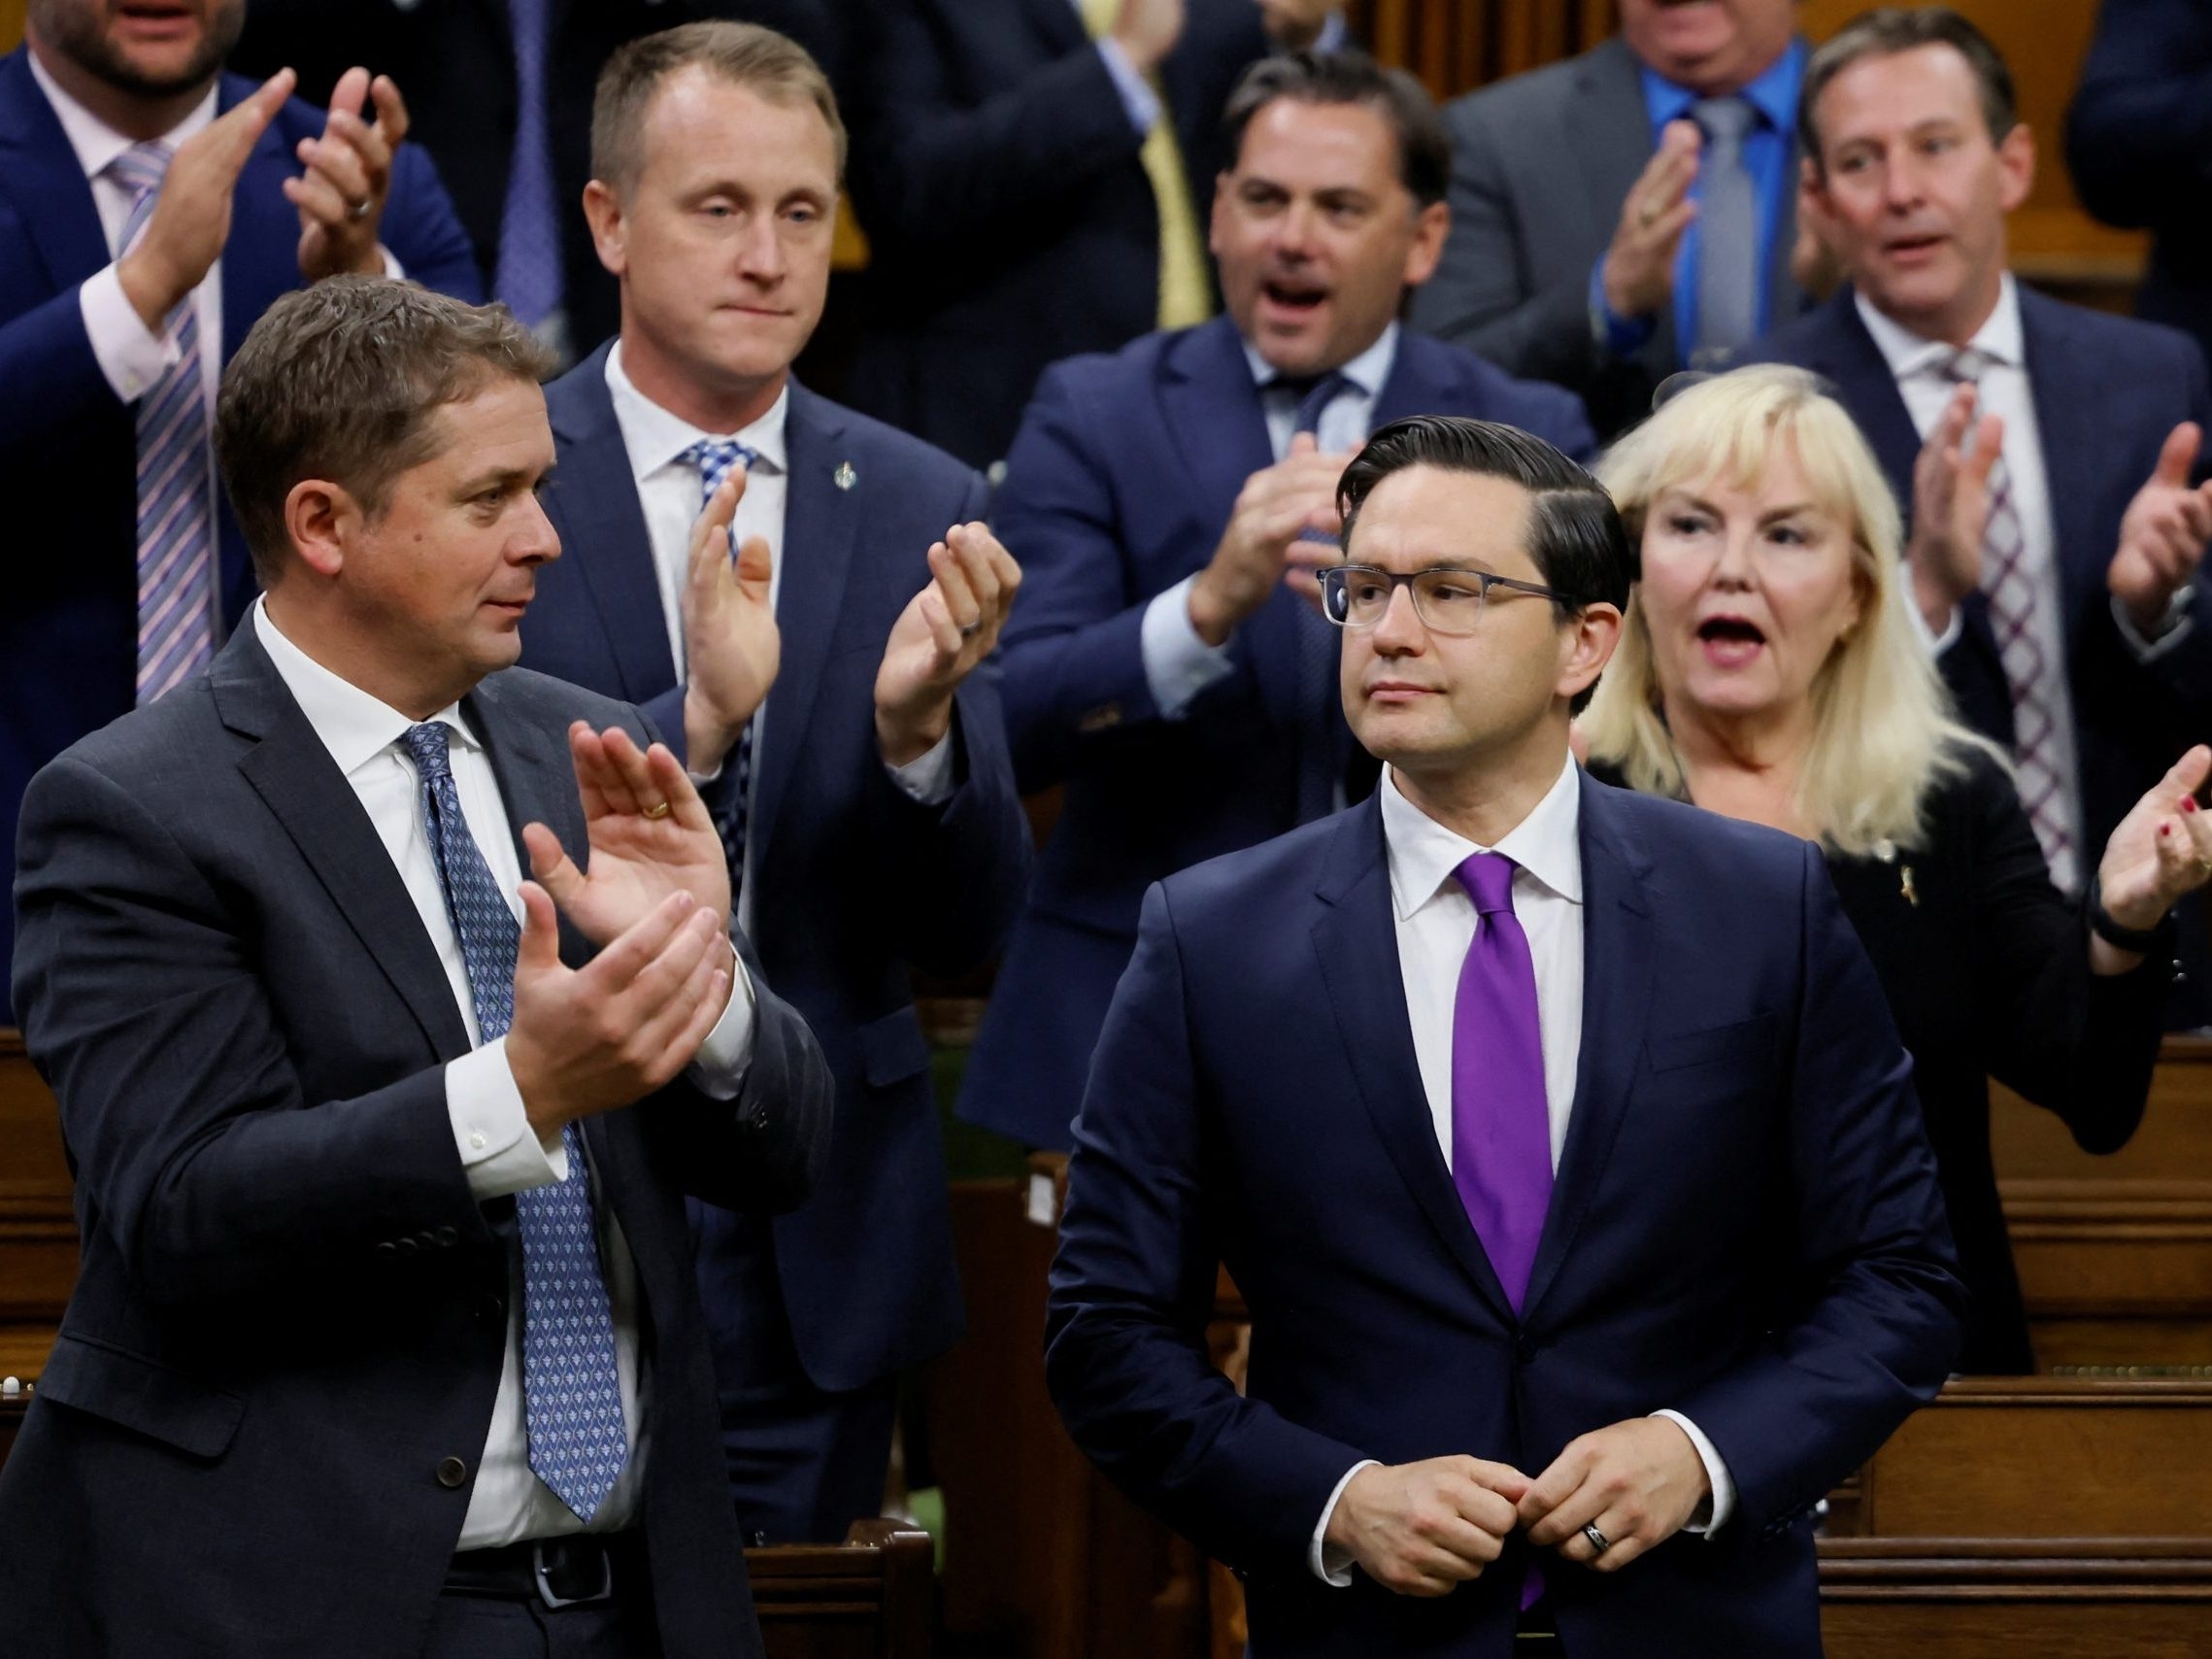 LILLEY: Poilievre's Conservatives ahead of Trudeau's Liberals, third poll shows